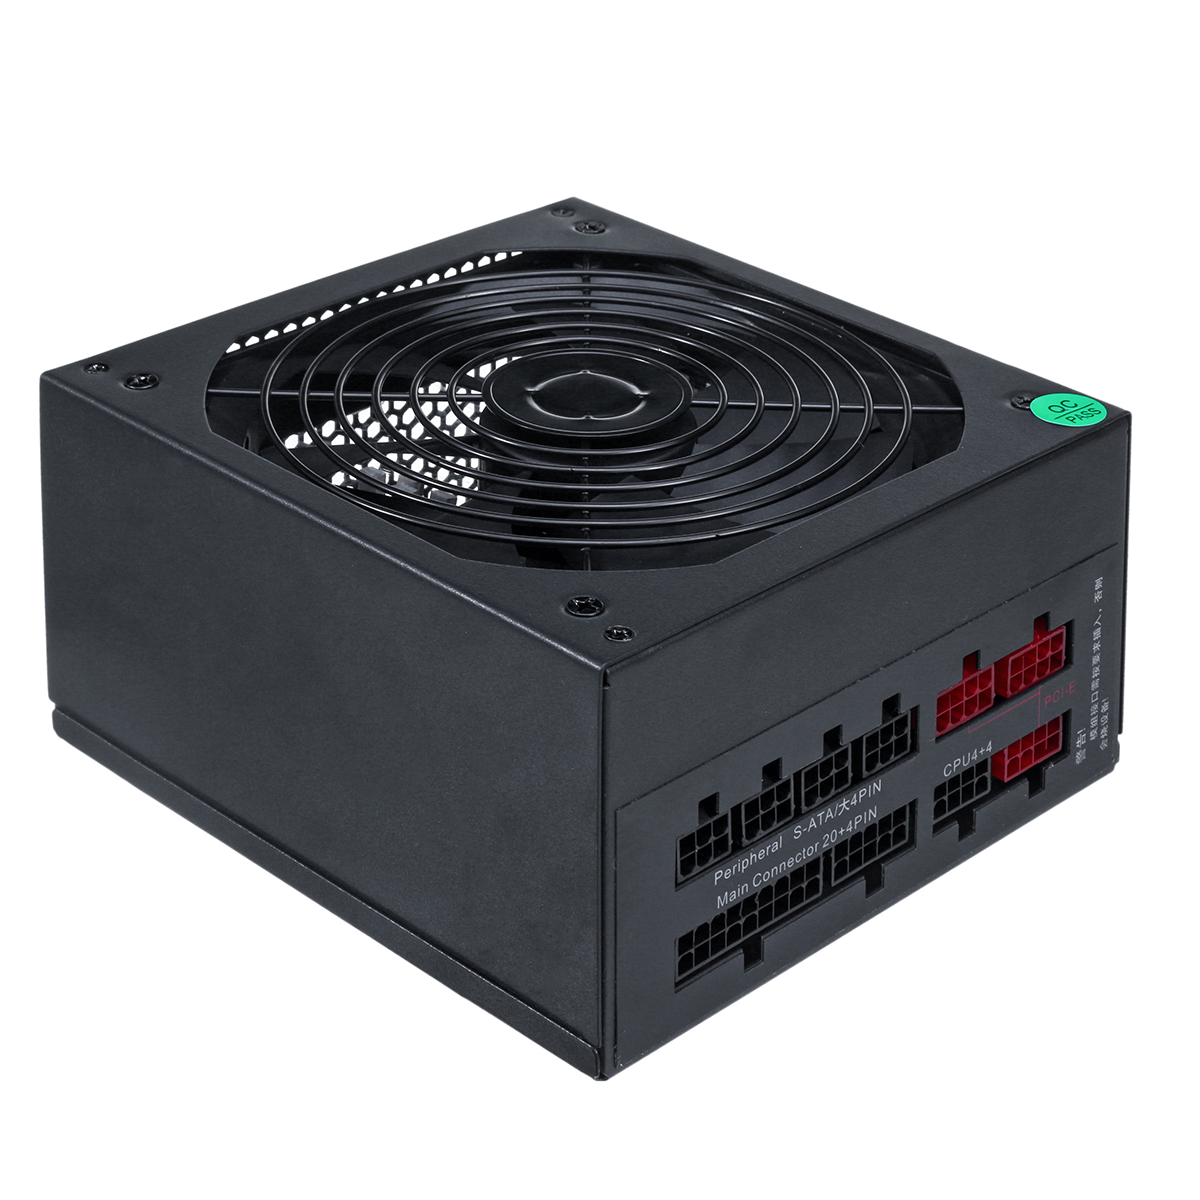 Find 750W Full Module Power Supply 110 230V 14cm Fan 24 Pin PCI SATA 12V EU Plug Computer Power Supply for Sale on Gipsybee.com with cryptocurrencies